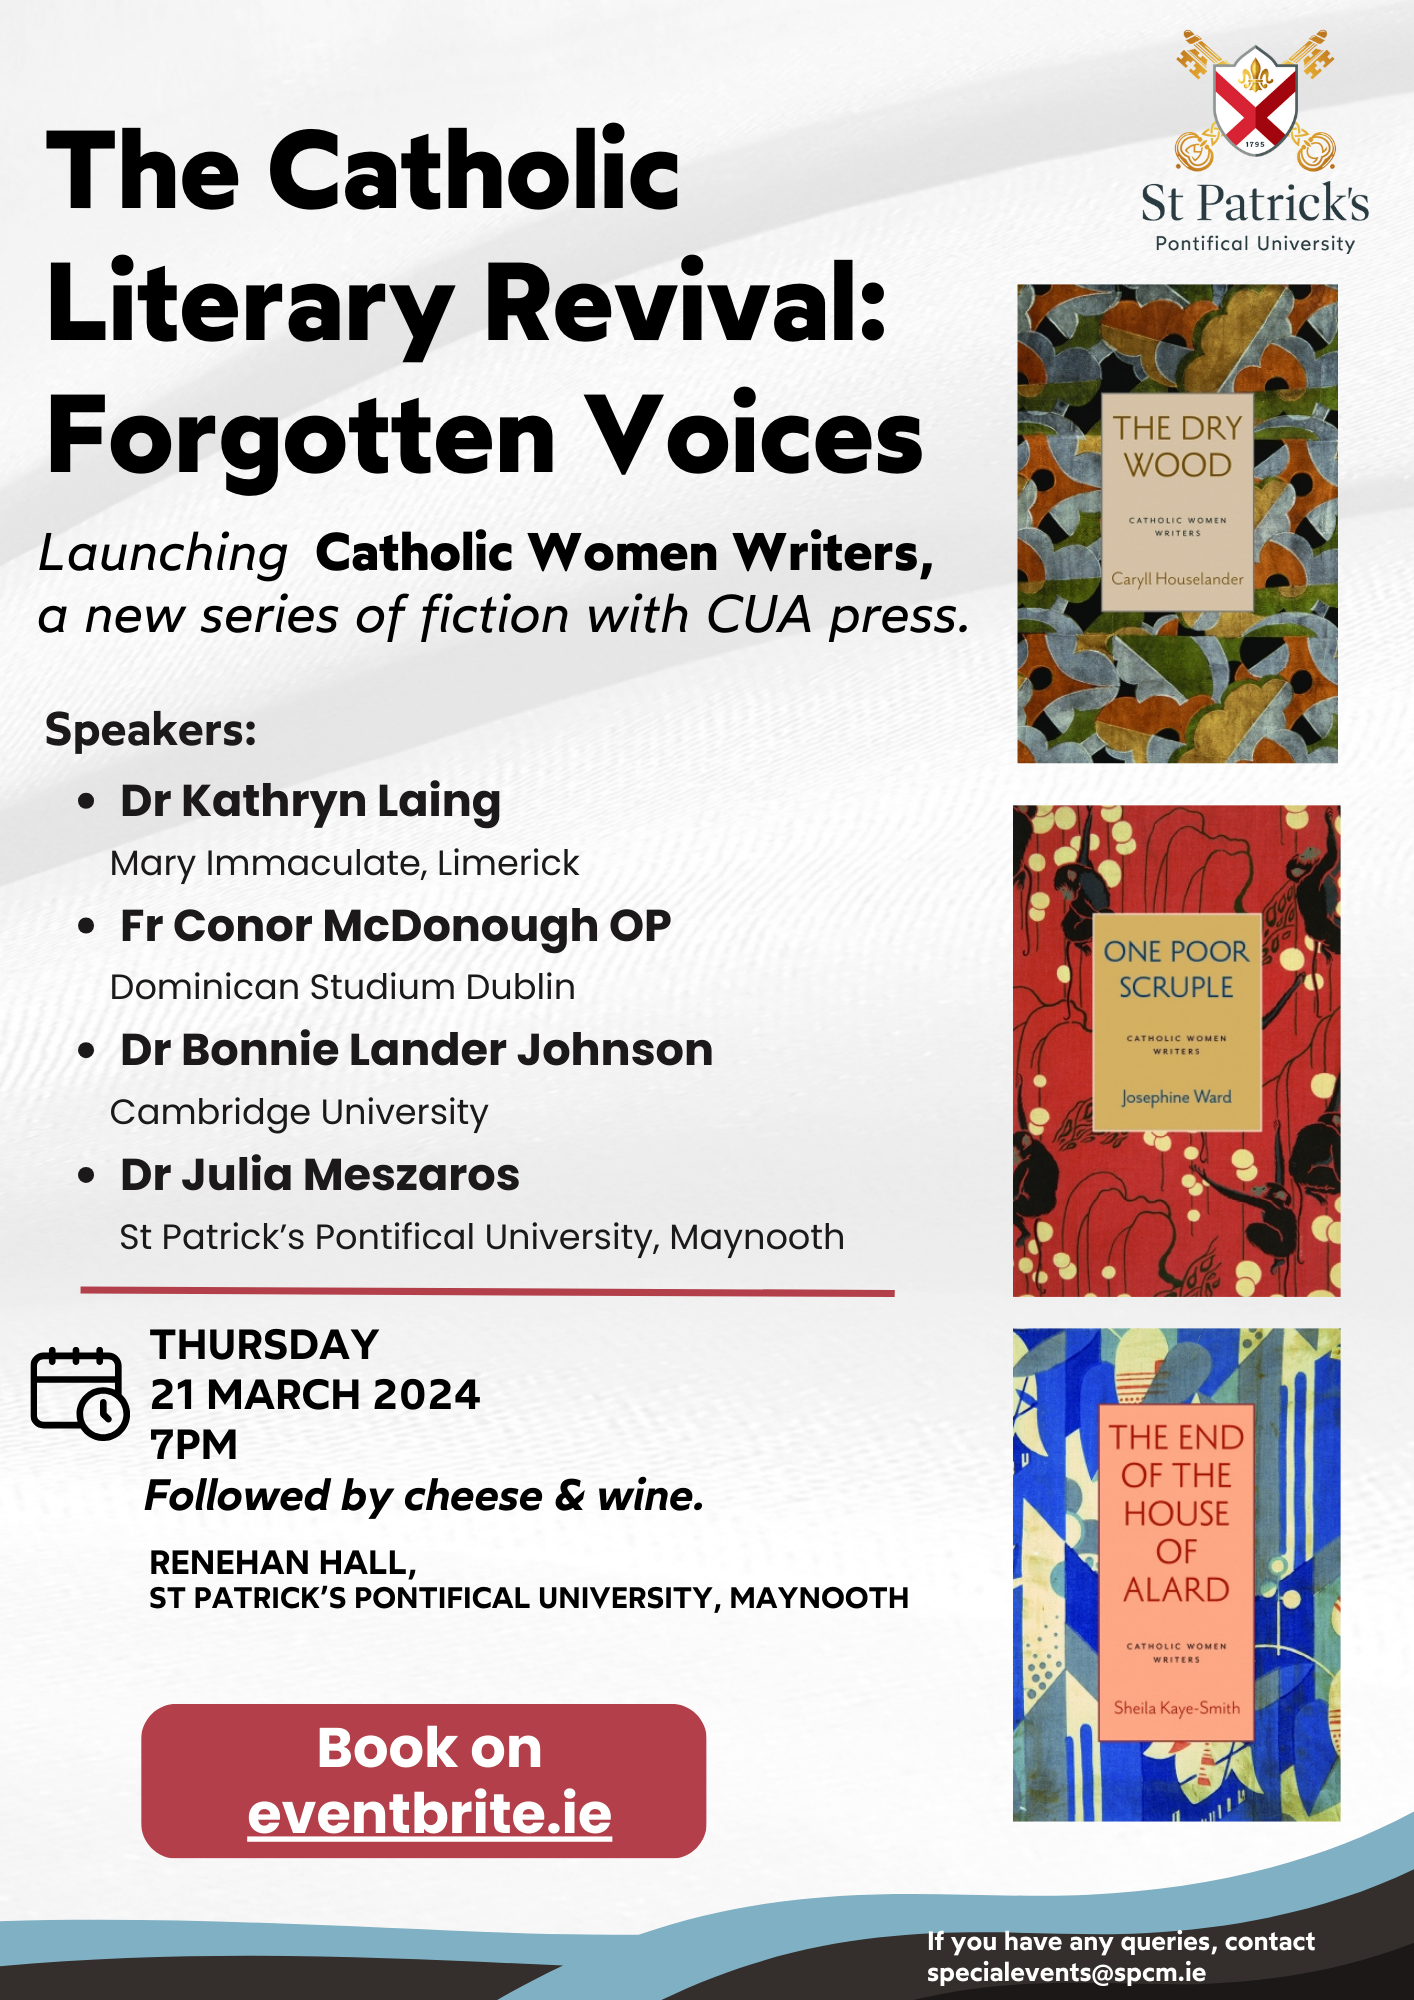 Launch Event: The Catholic Literary Revival: Forgotten Voices (21 March 2024)